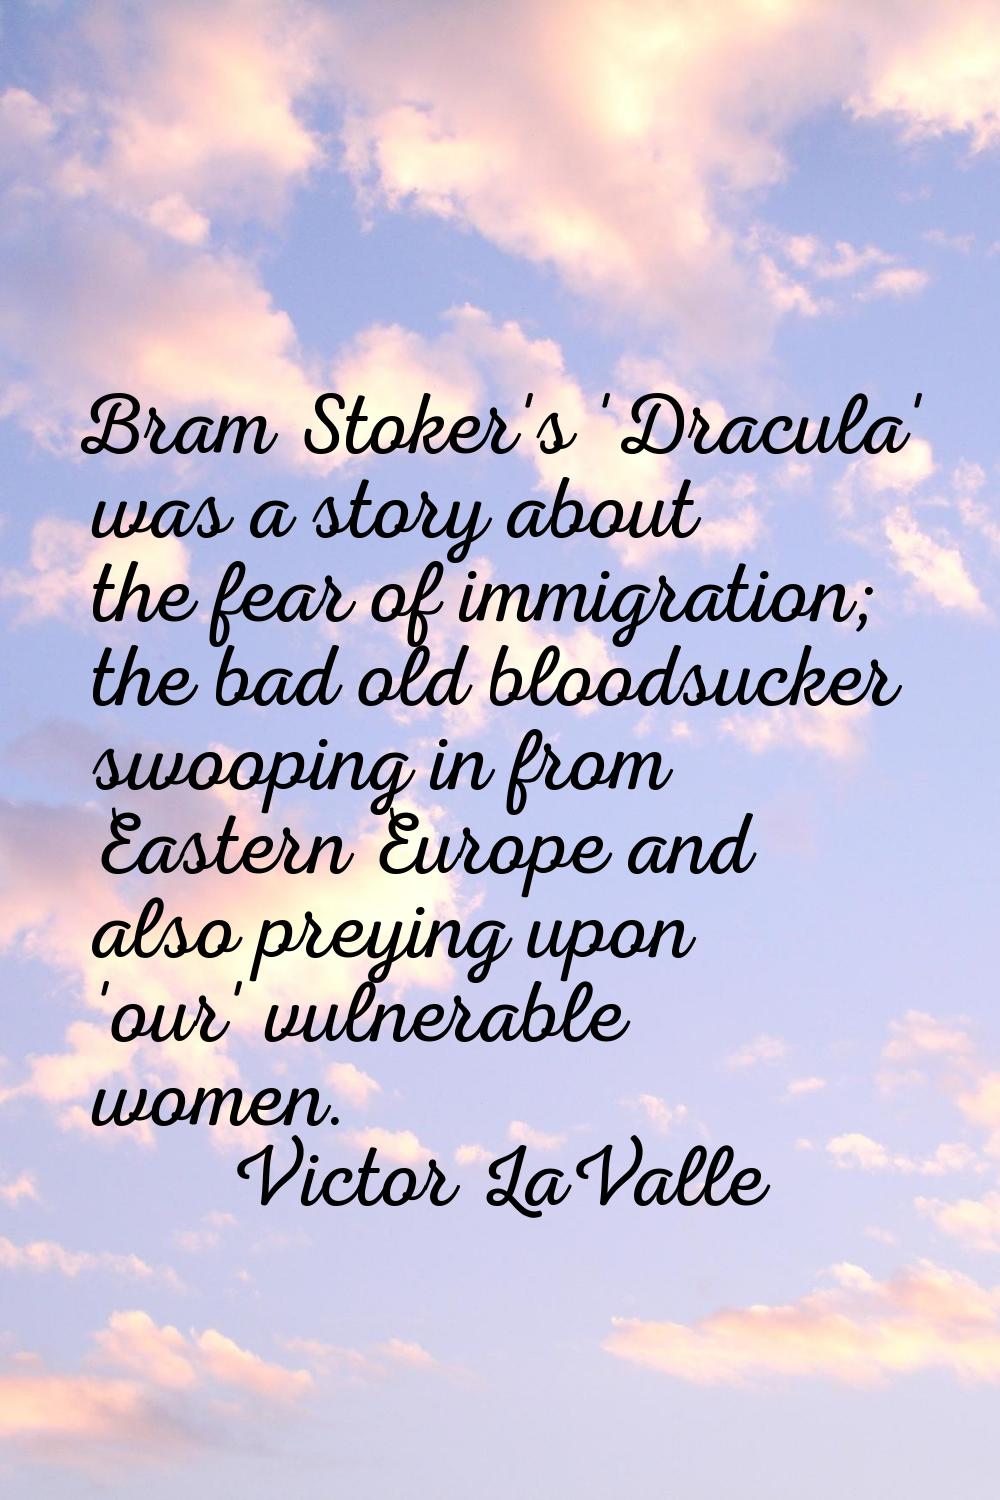 Bram Stoker's 'Dracula' was a story about the fear of immigration; the bad old bloodsucker swooping